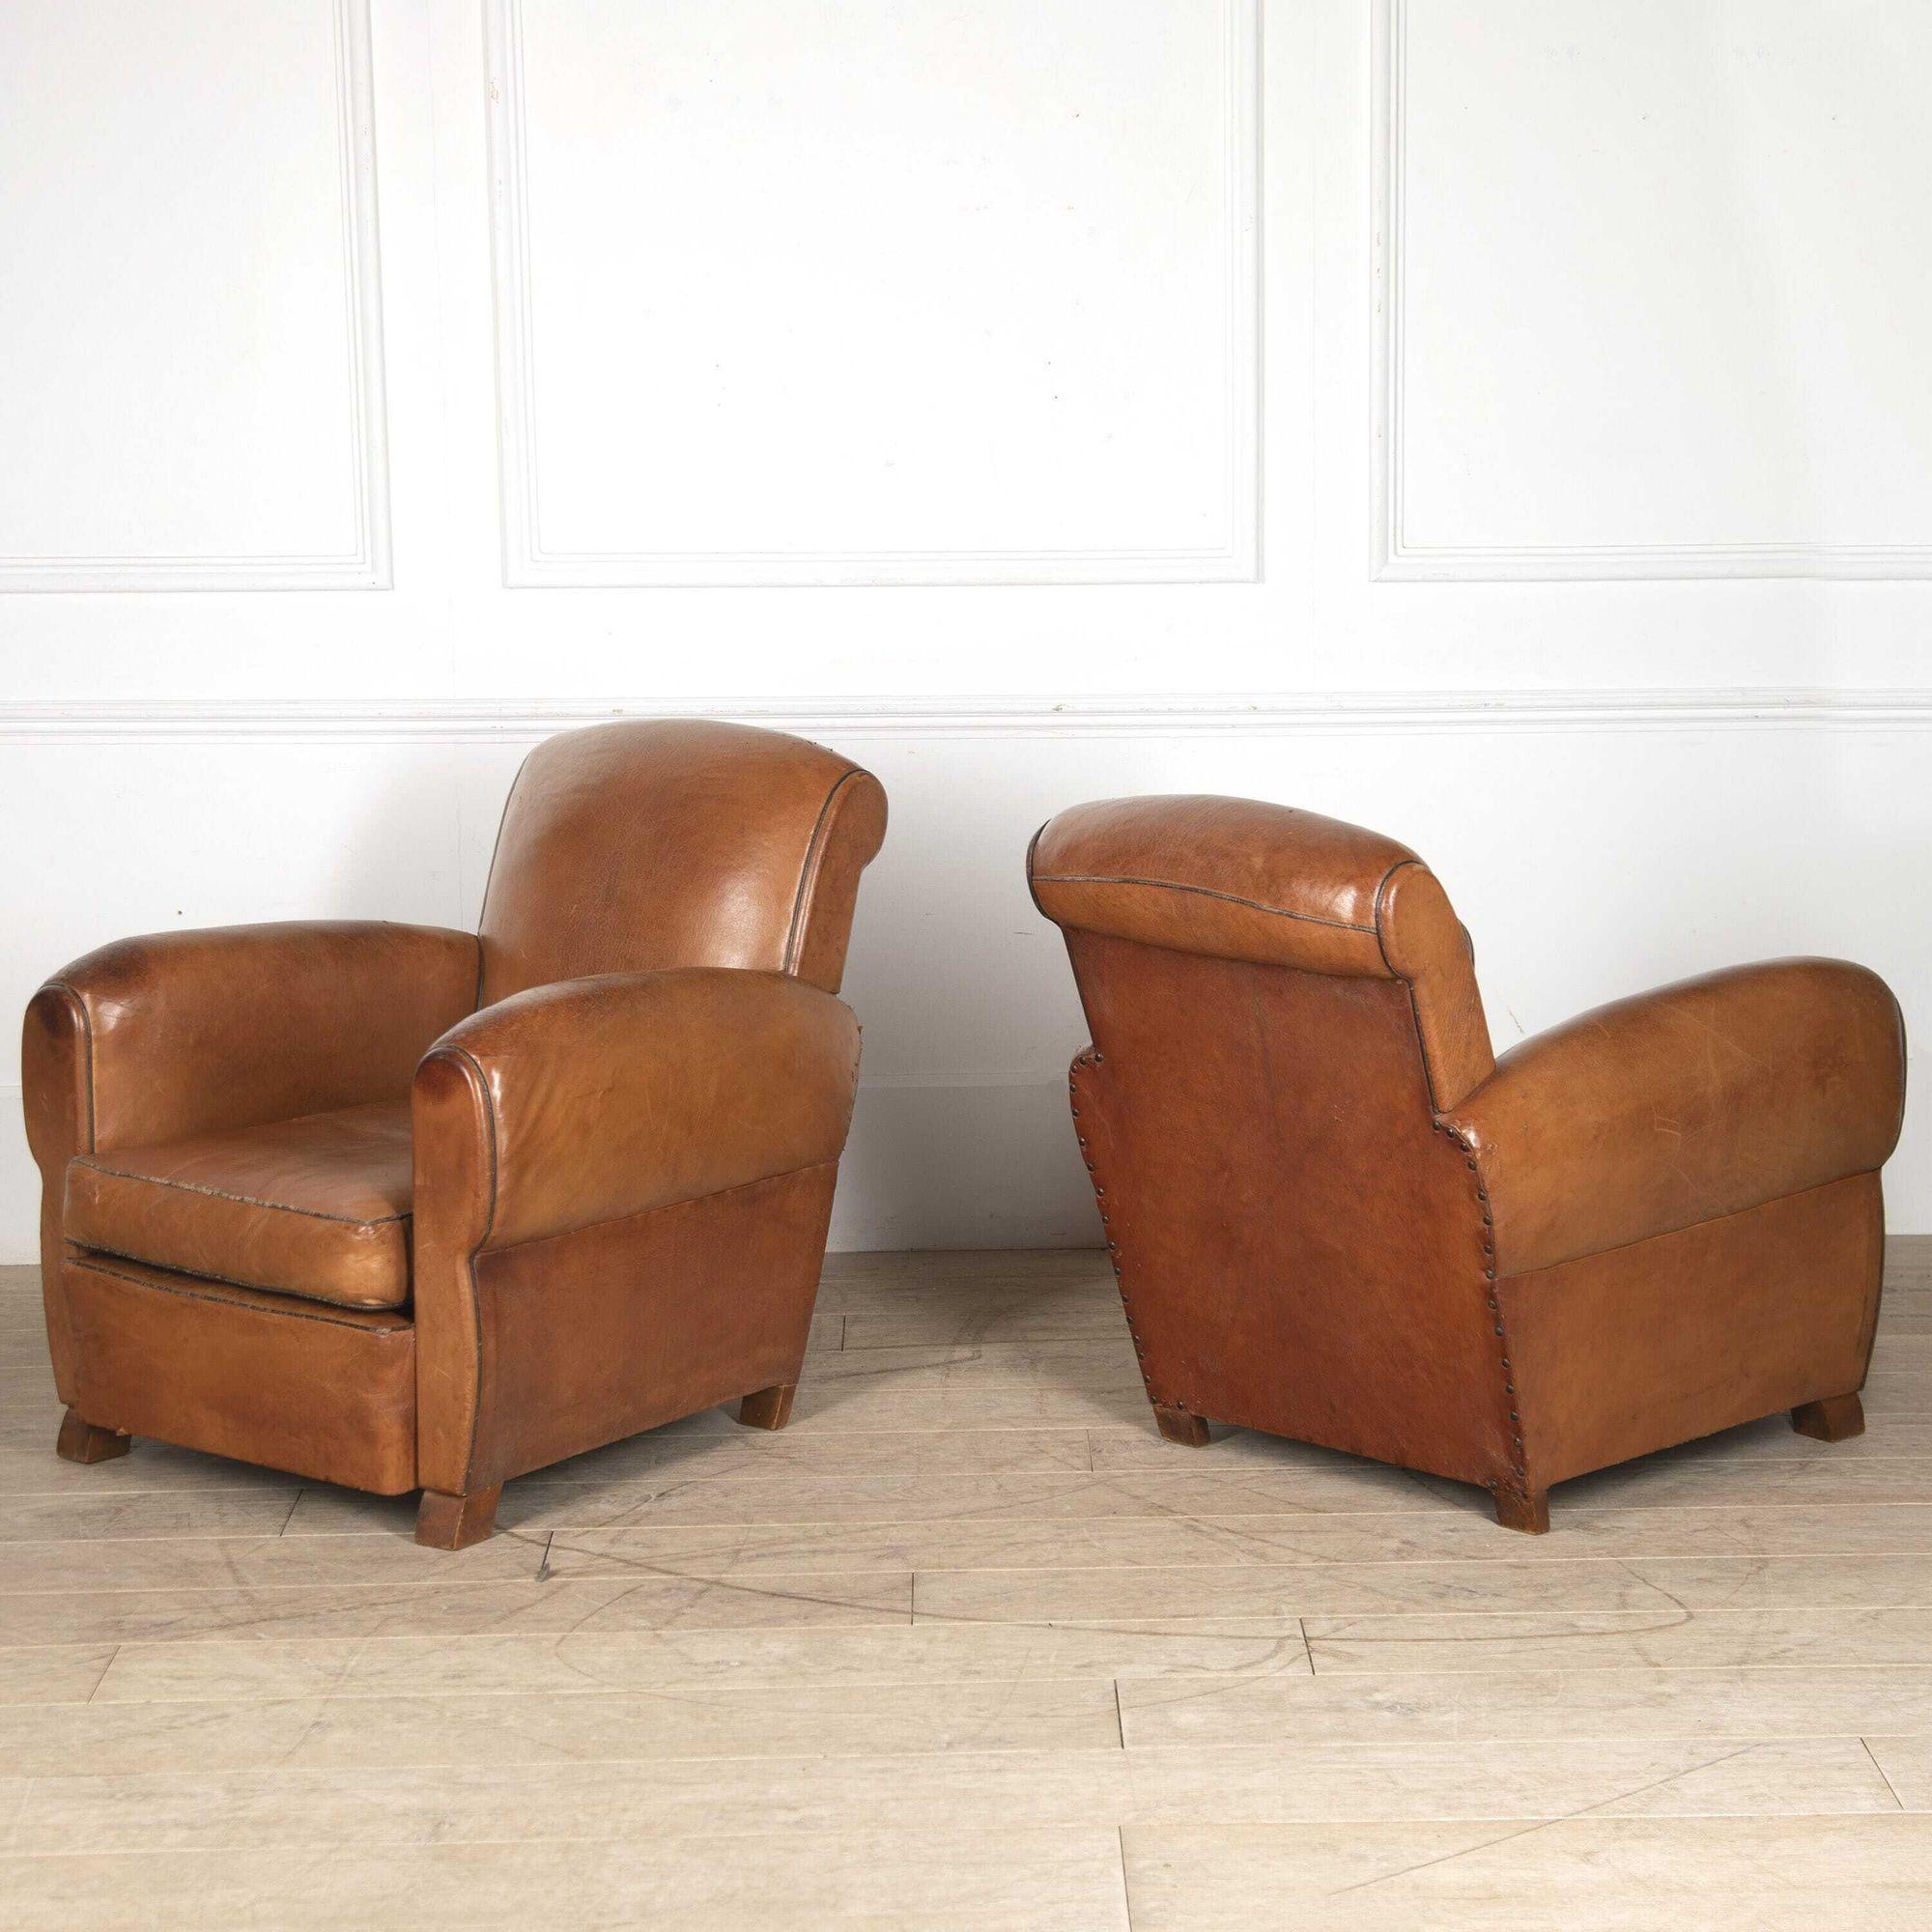 Lovely pair of French leather armchairs dating from the 1930s.
Club chairs were immersed in interior décor both in France and England since their conception in the early 20th century.
In both countries, they were firm fixtures in gentleman's clubs